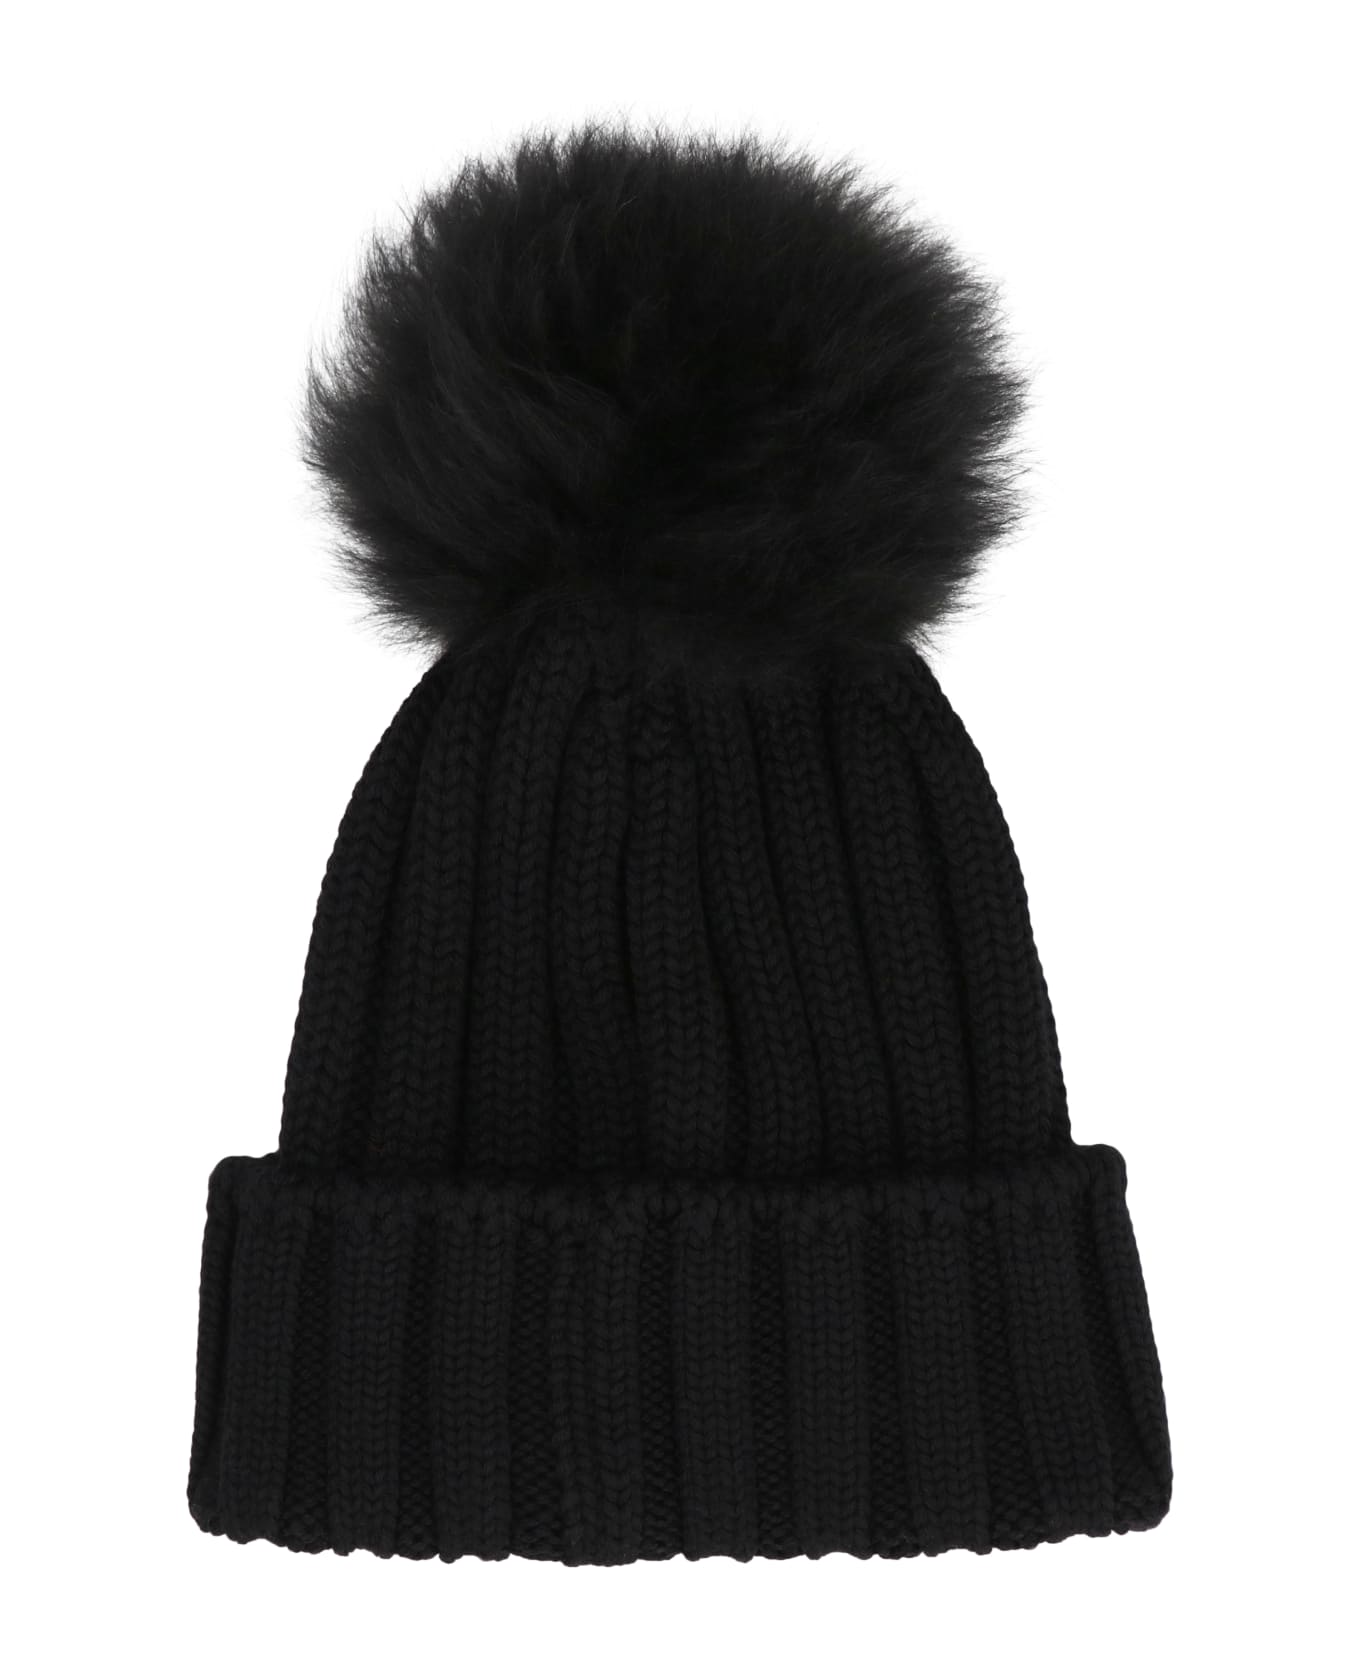 Woolrich Knitted Wool Beanie With Pom-pom